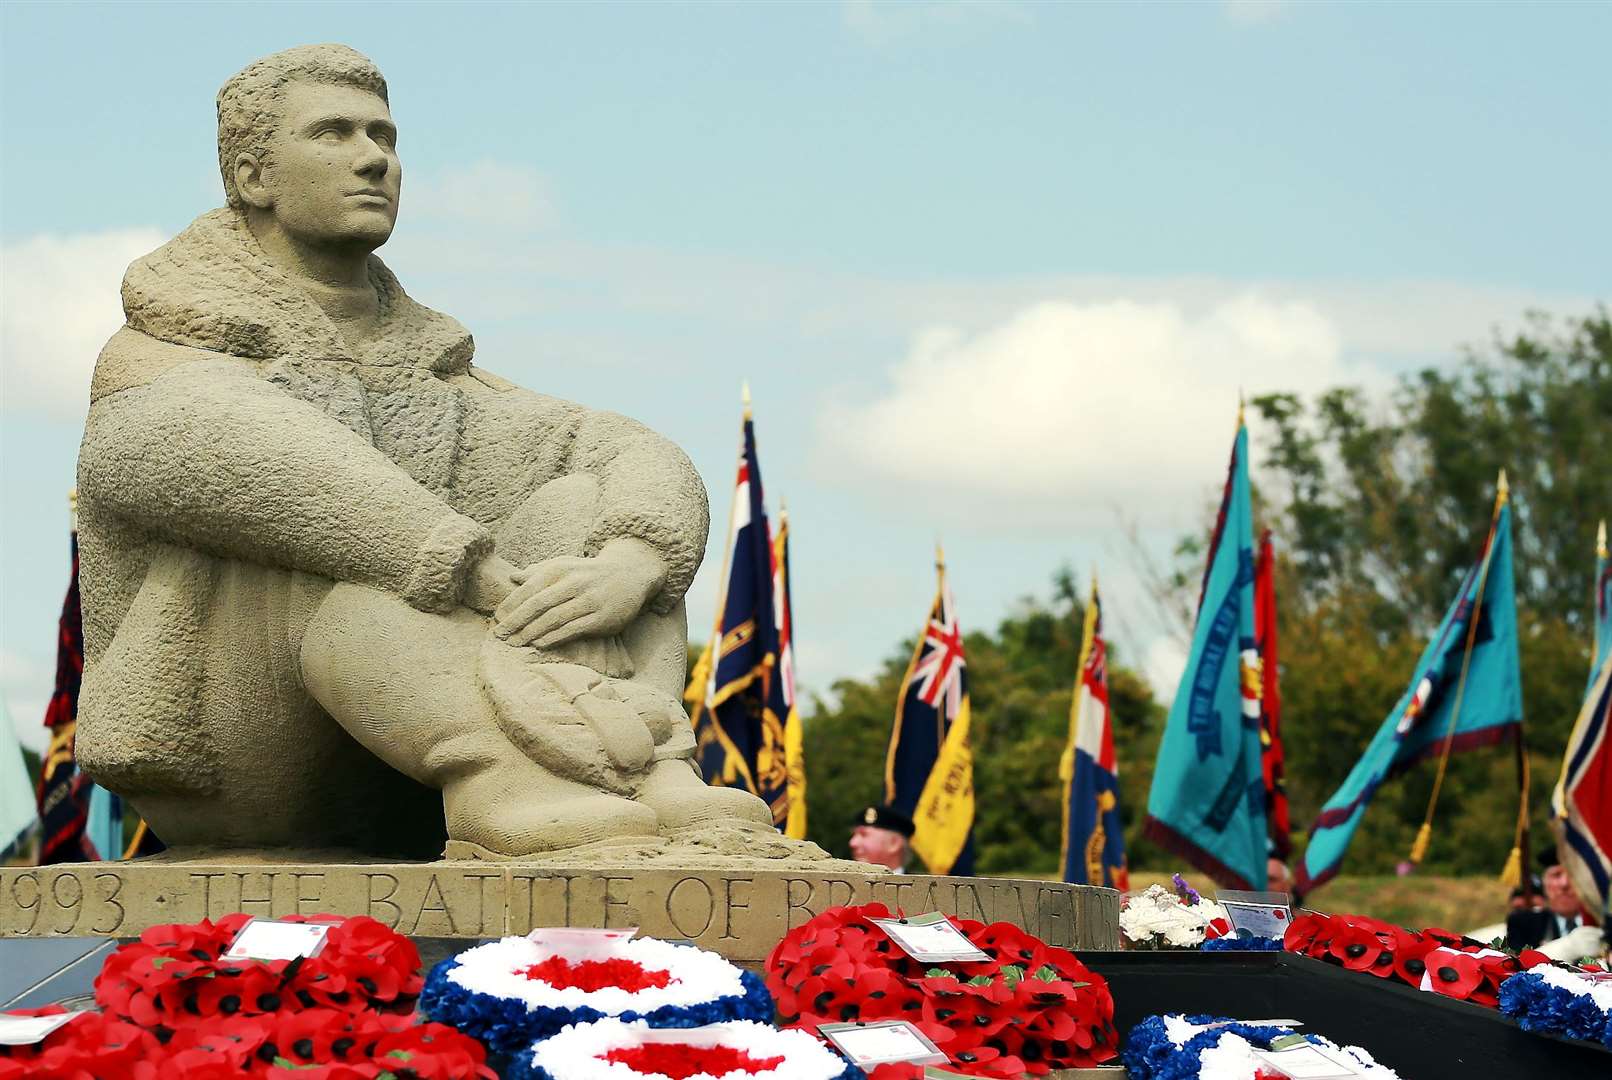 The Battle of Britain Memorial is currently closed due to the Covid-19 outbreak